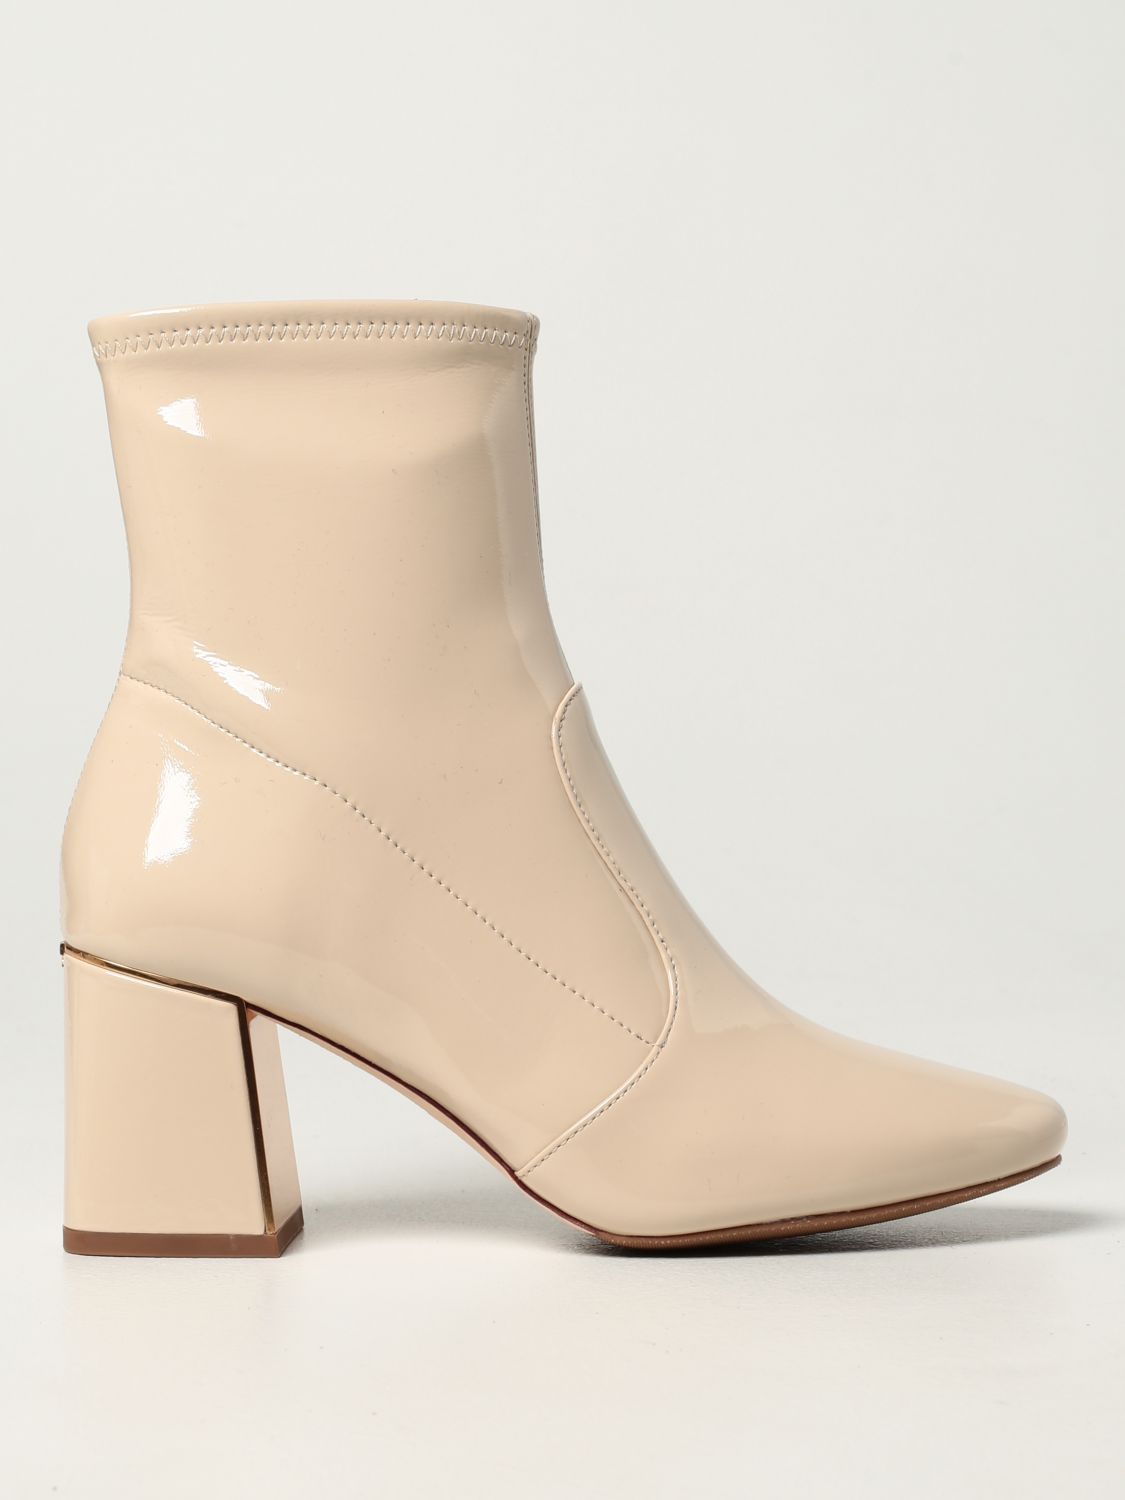 Tory Burch Ankle Boots Wholesale Cheapest, Save 40% 